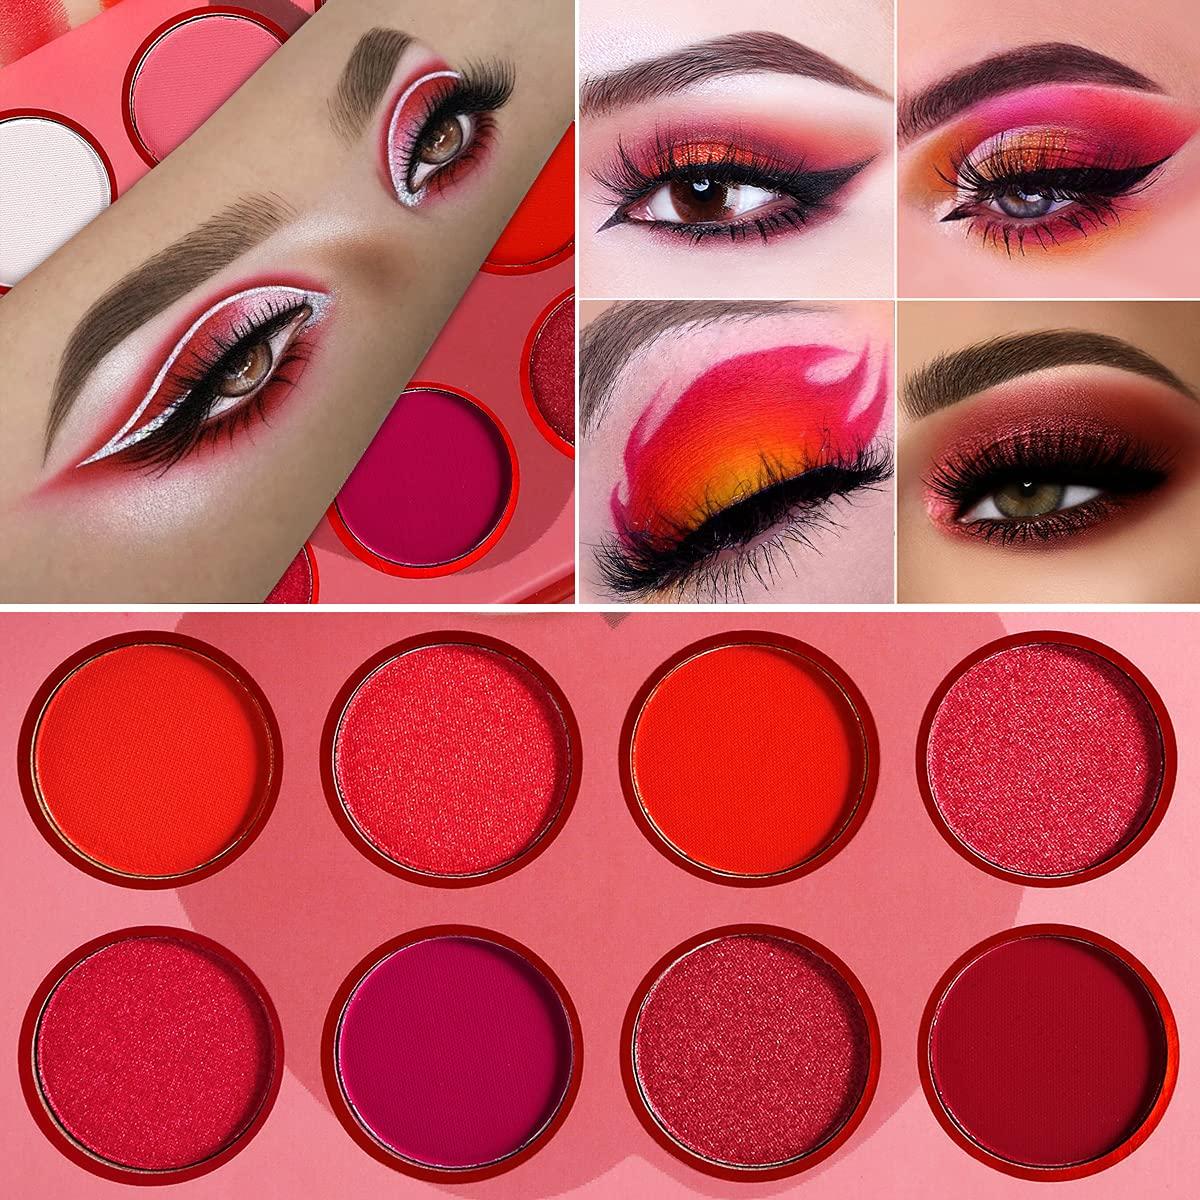 Red Eyeshadow Palettes Makeup Professional,Afflano Pigmented and Blending Bright Dark Hot True Red Eye Shade 12 Color,Velvet Matte Shimmer Texture Warm Fall Sunset Eye Shadow Pallet-Cruelty Free